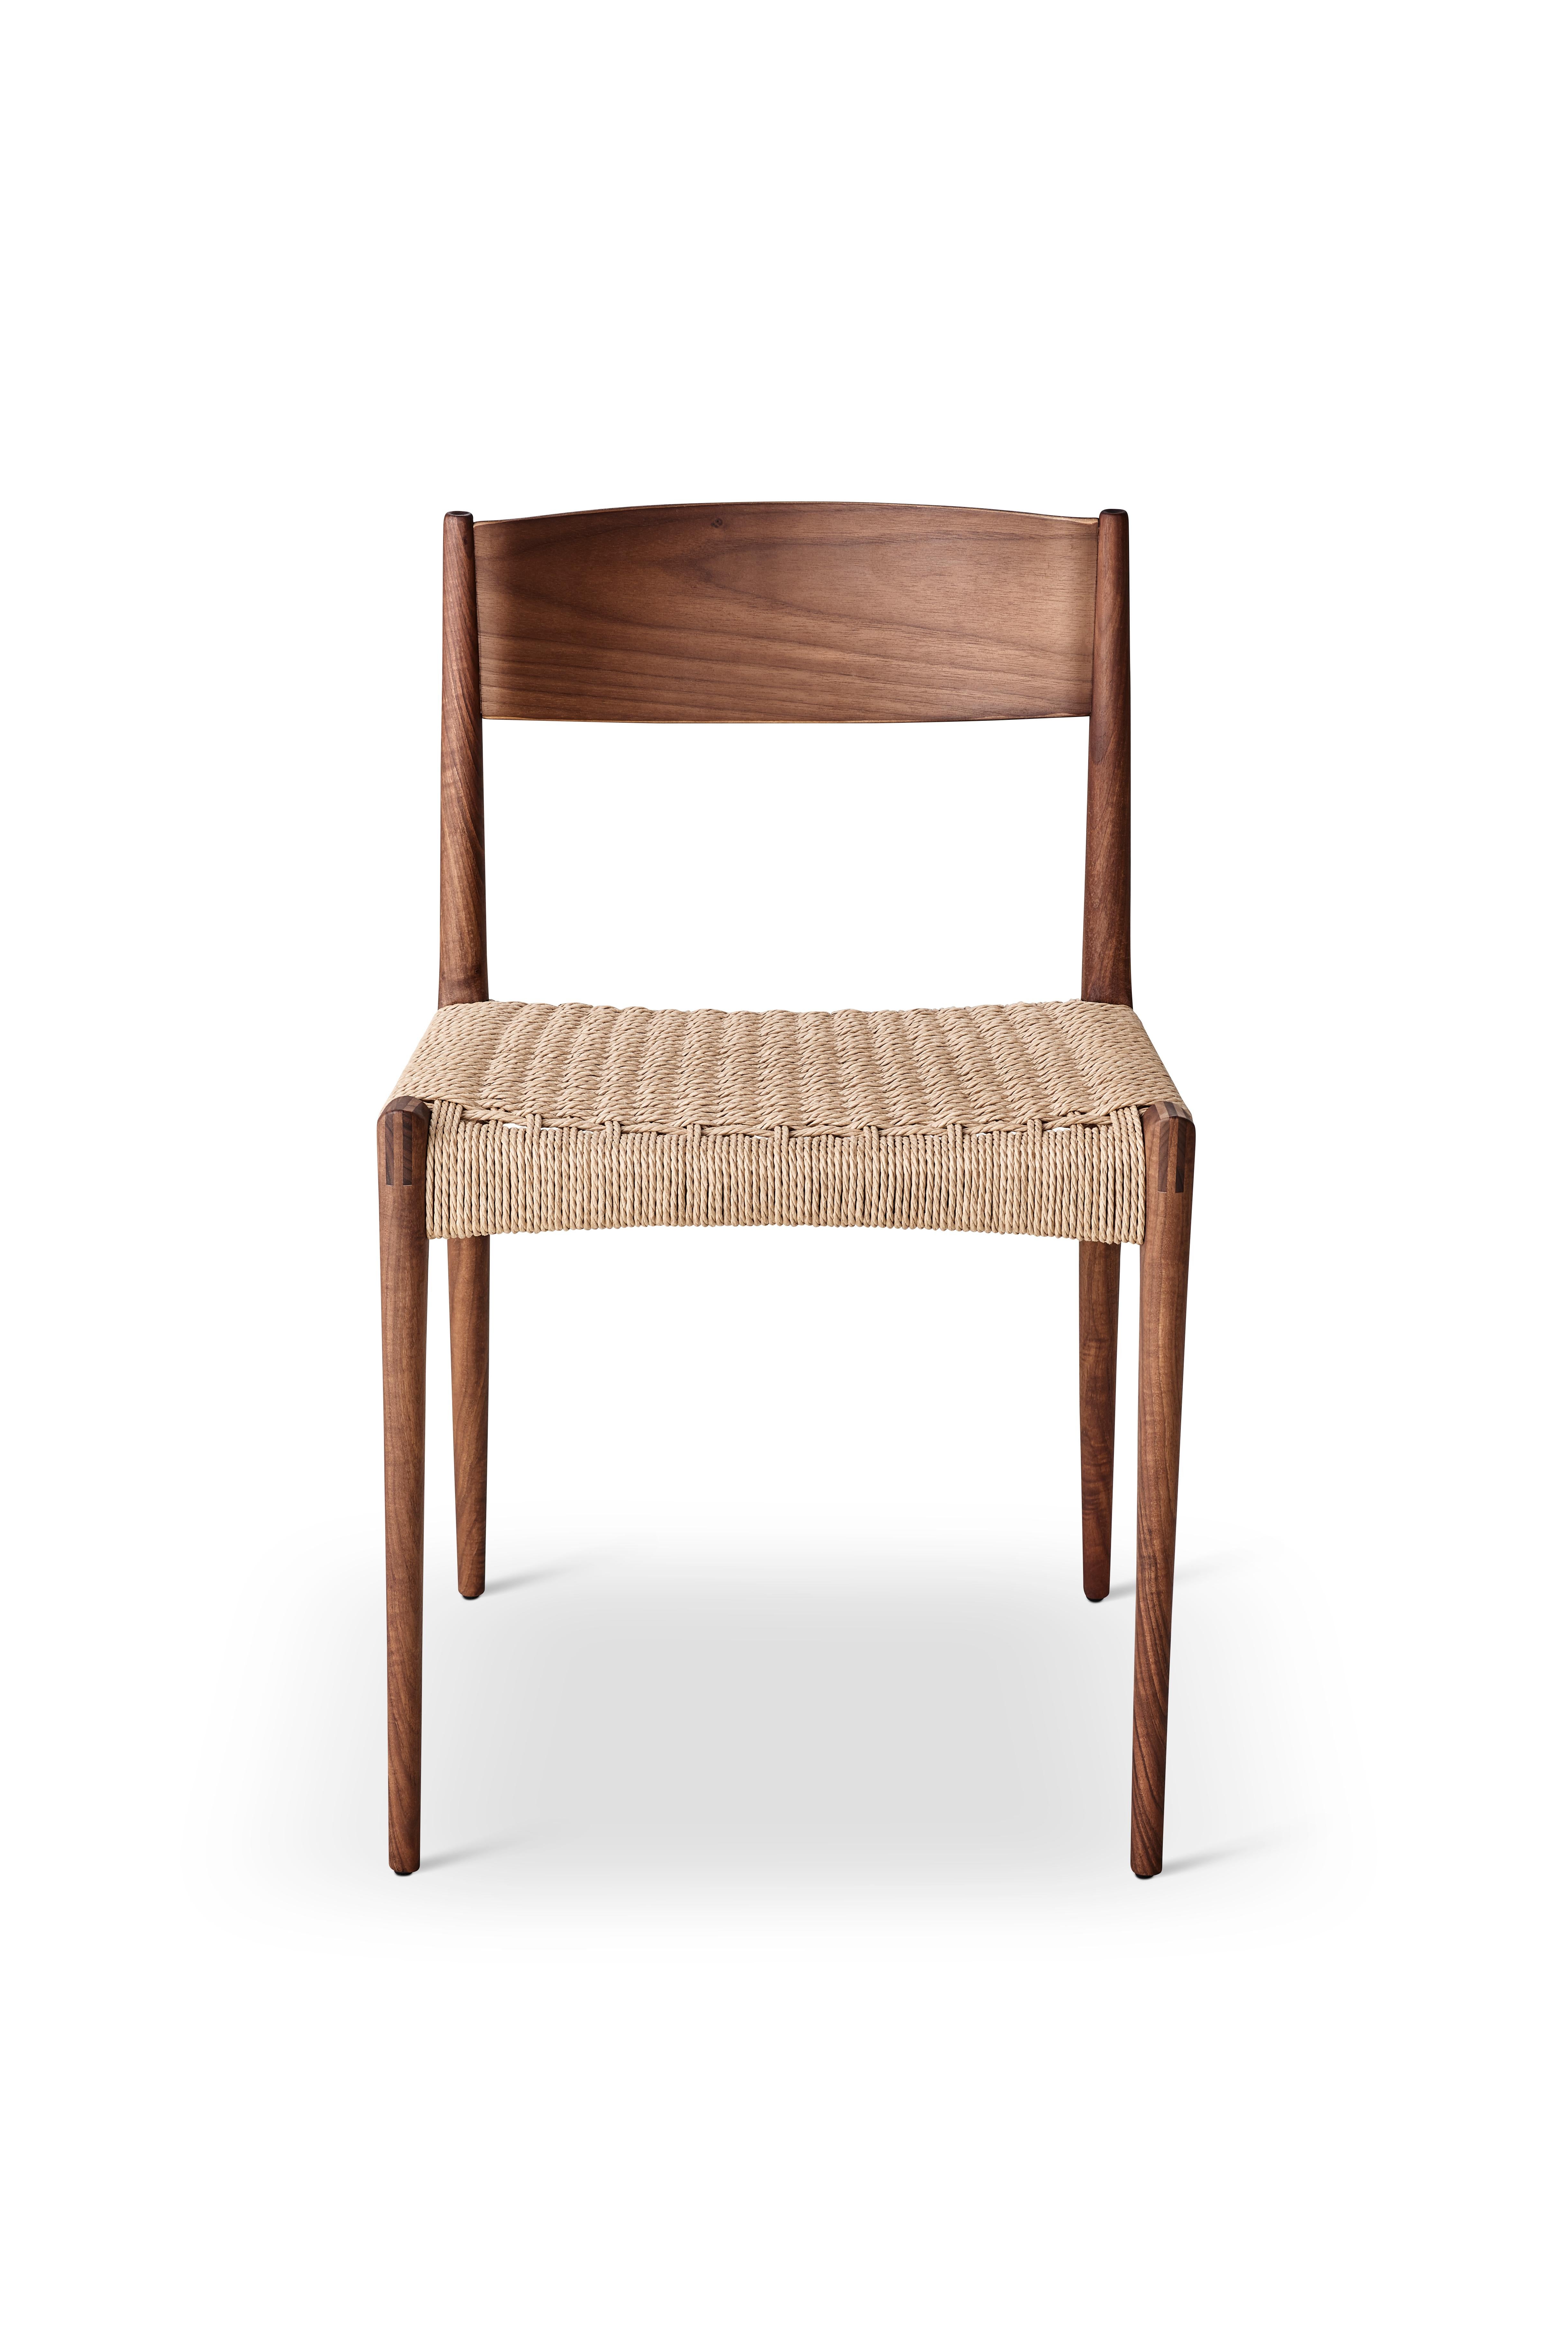 PIA chair
Solid oak frame, paper cordel seat
Dimensions: H 75 x 49 x 48 cm (seat height 45cm)

Wood:
– Oak
– Smoked oak
– Black lacquered oak
– Walnut

Paper cordel:
– Natural
– Black (Contact us)

--
The Pia chair signed by DK3 was